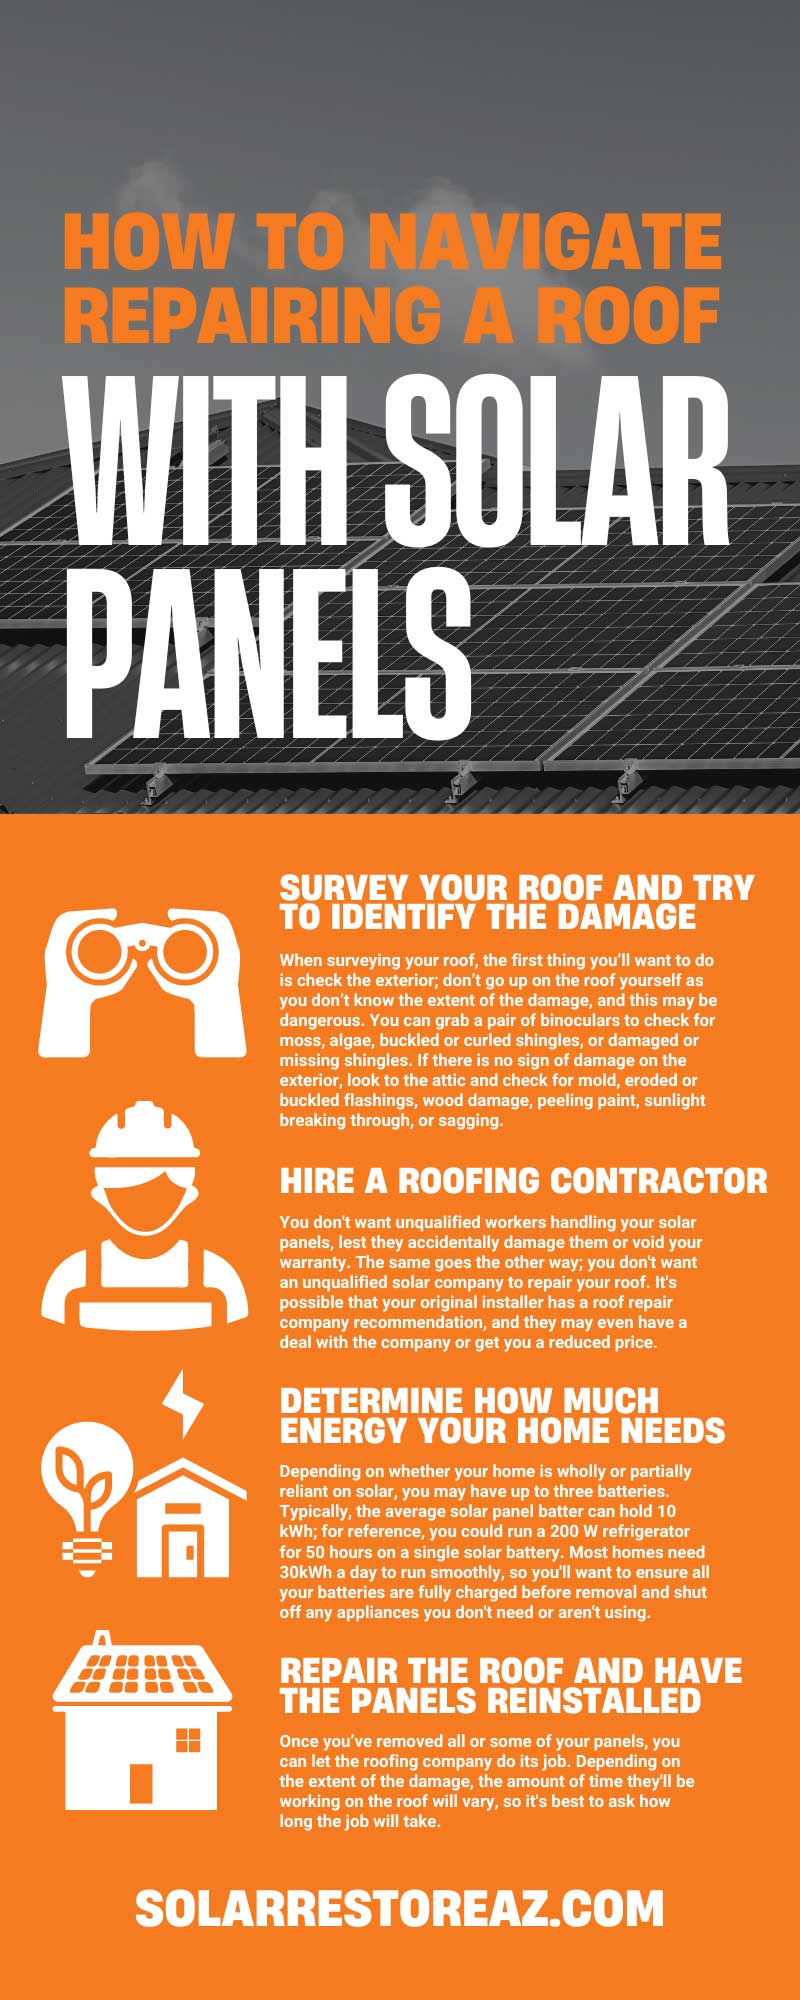 How To Navigate Repairing a Roof With Solar Panels